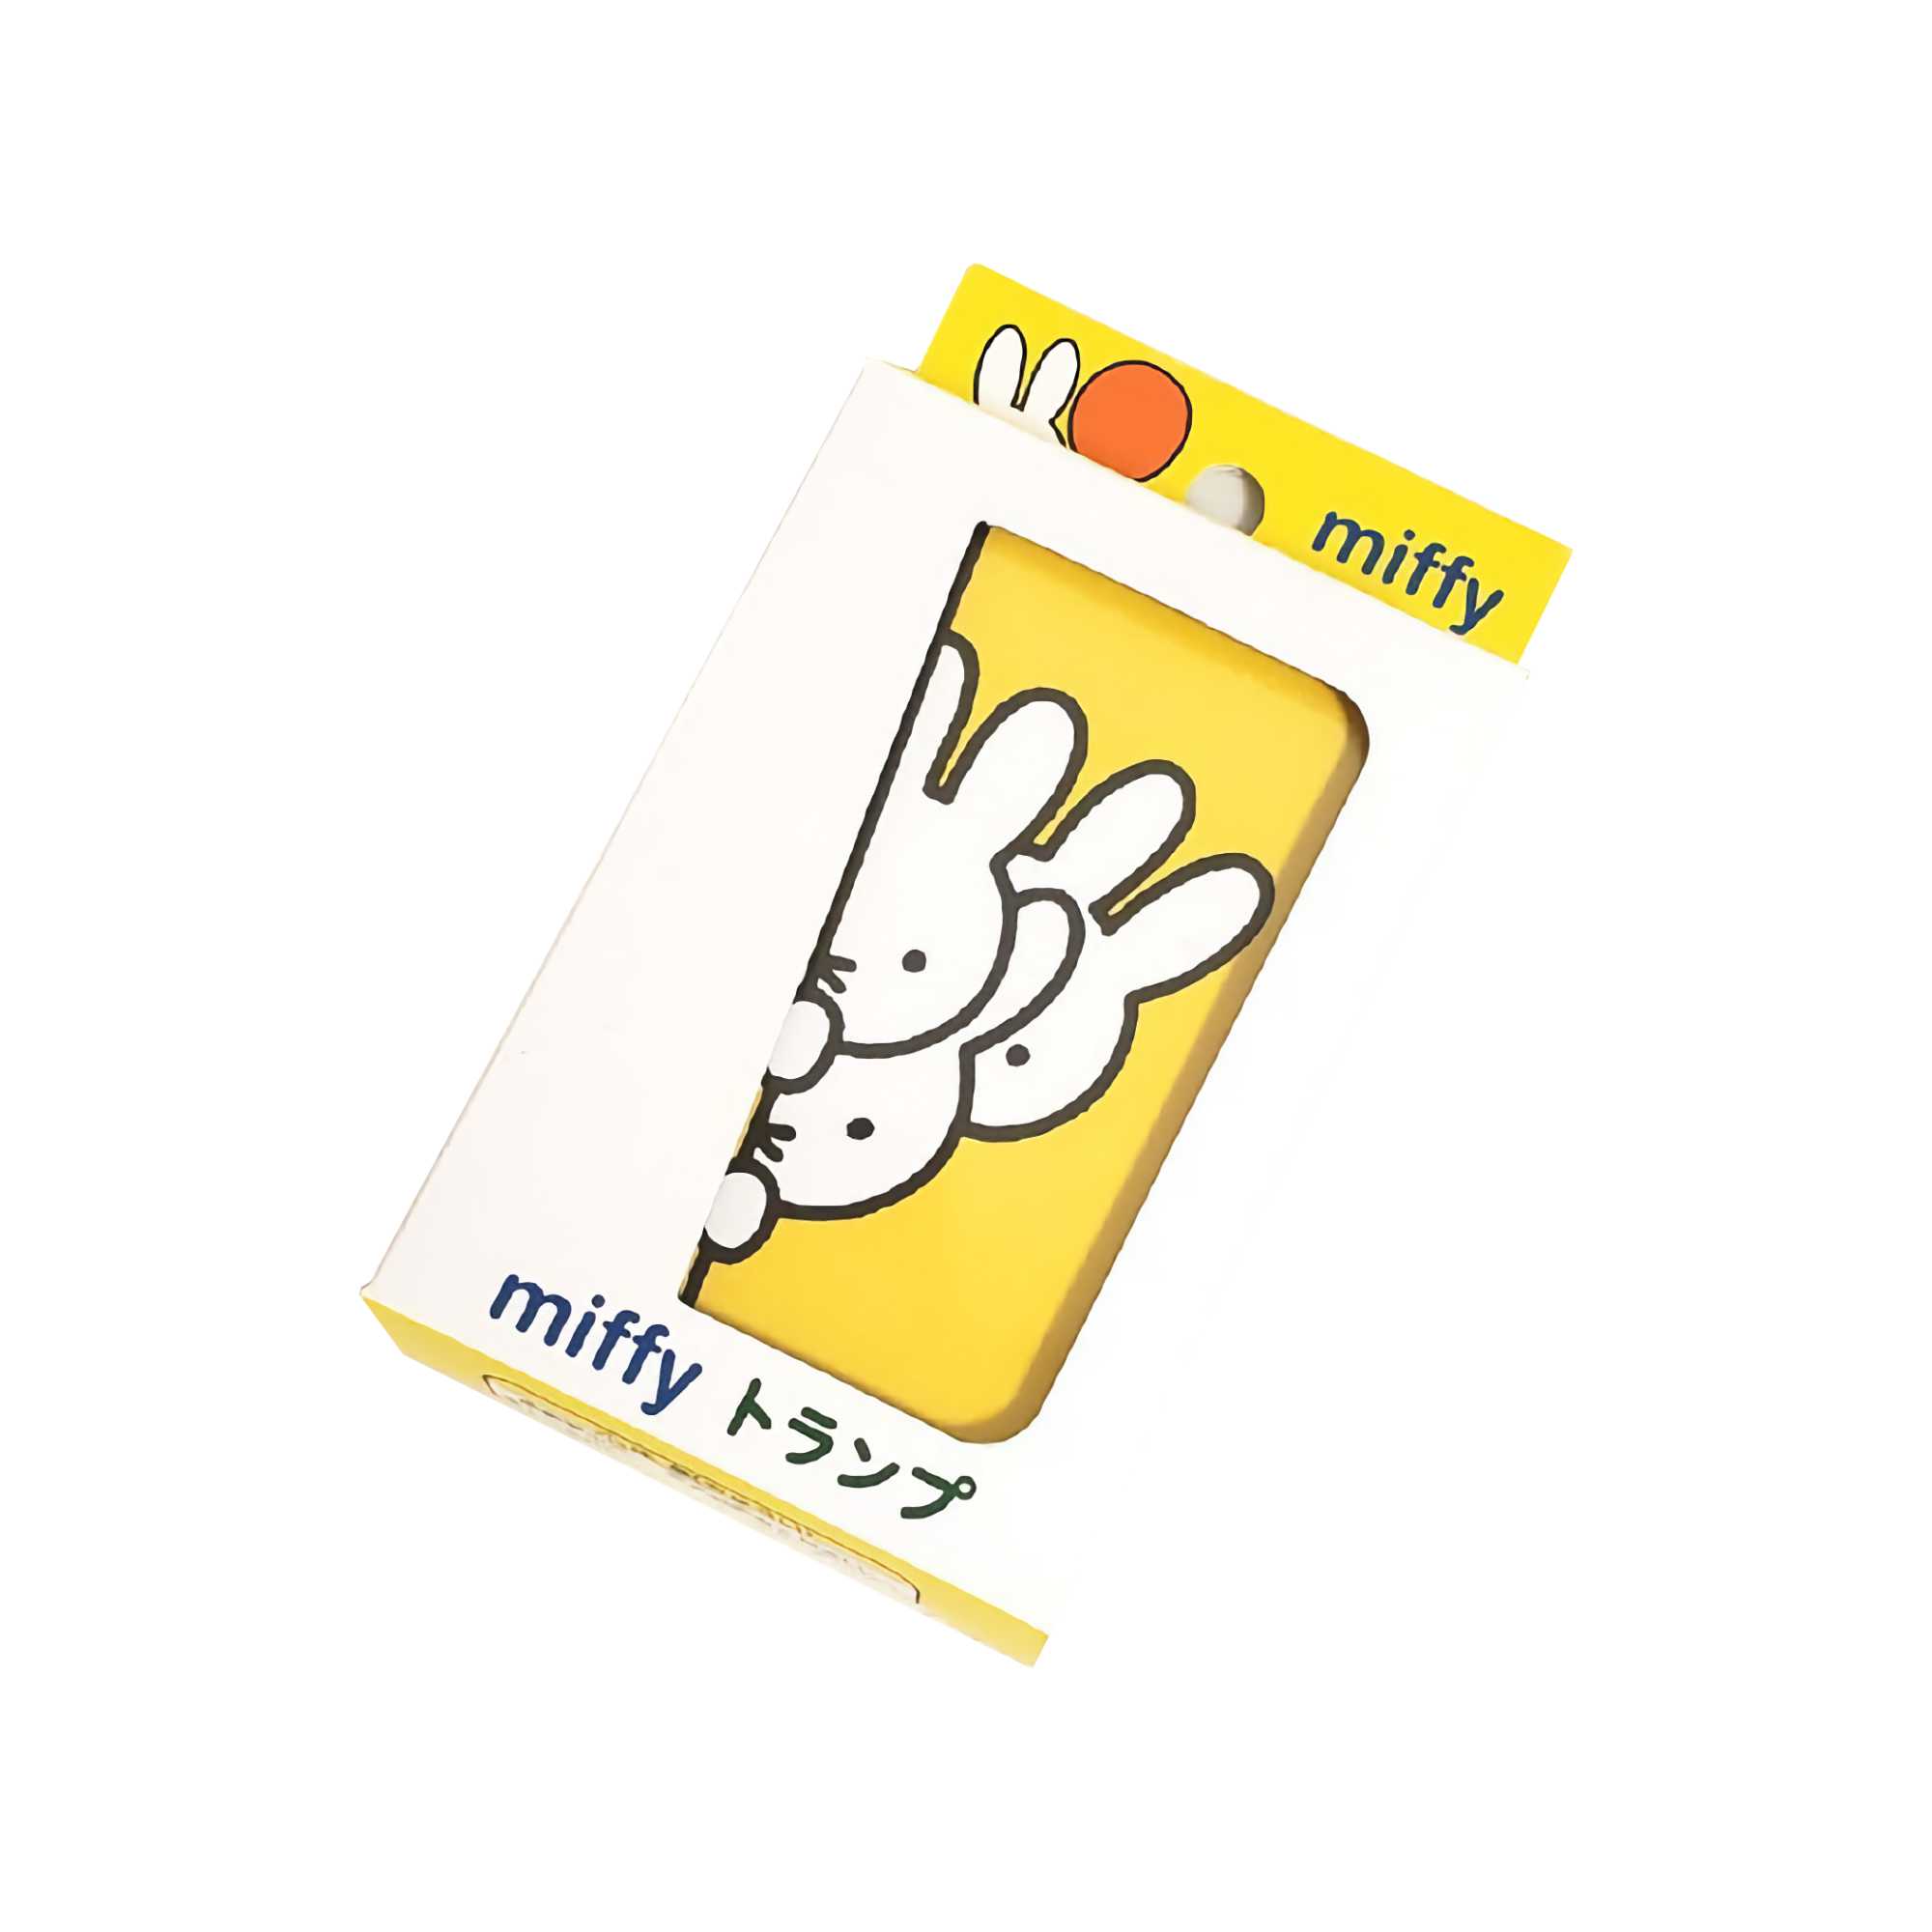 Miffy playing card